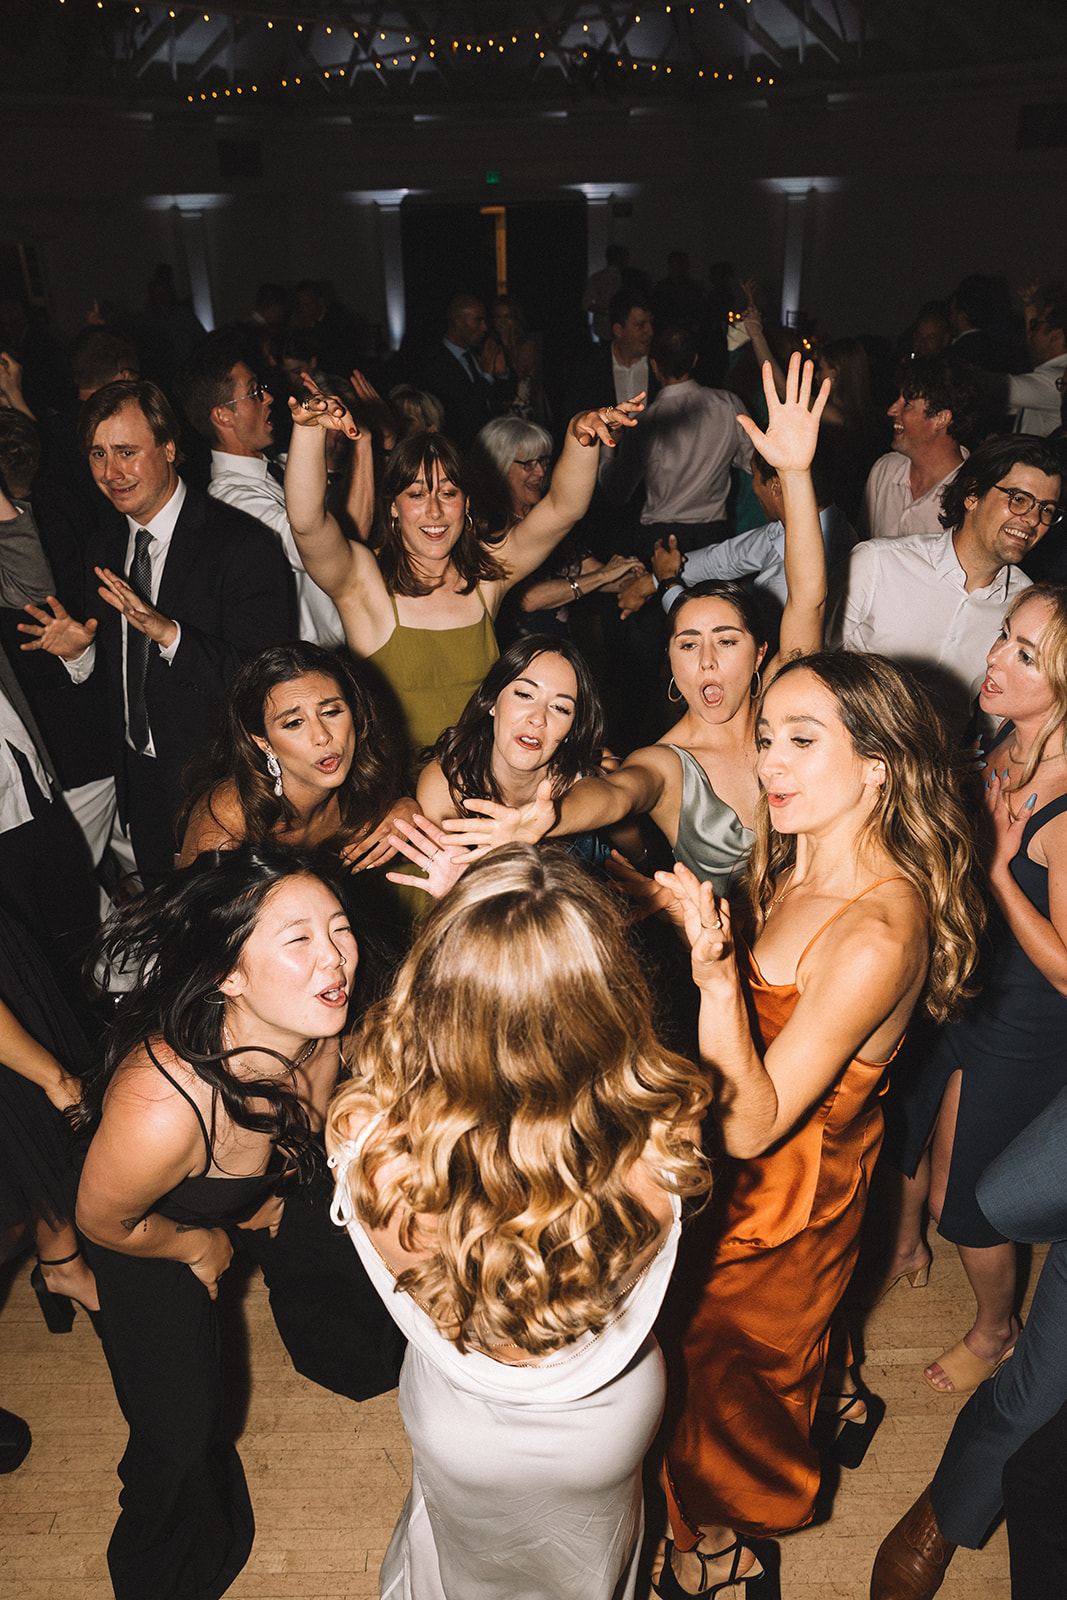 how to have the ultimate dance party at your wedding let loose and have fun